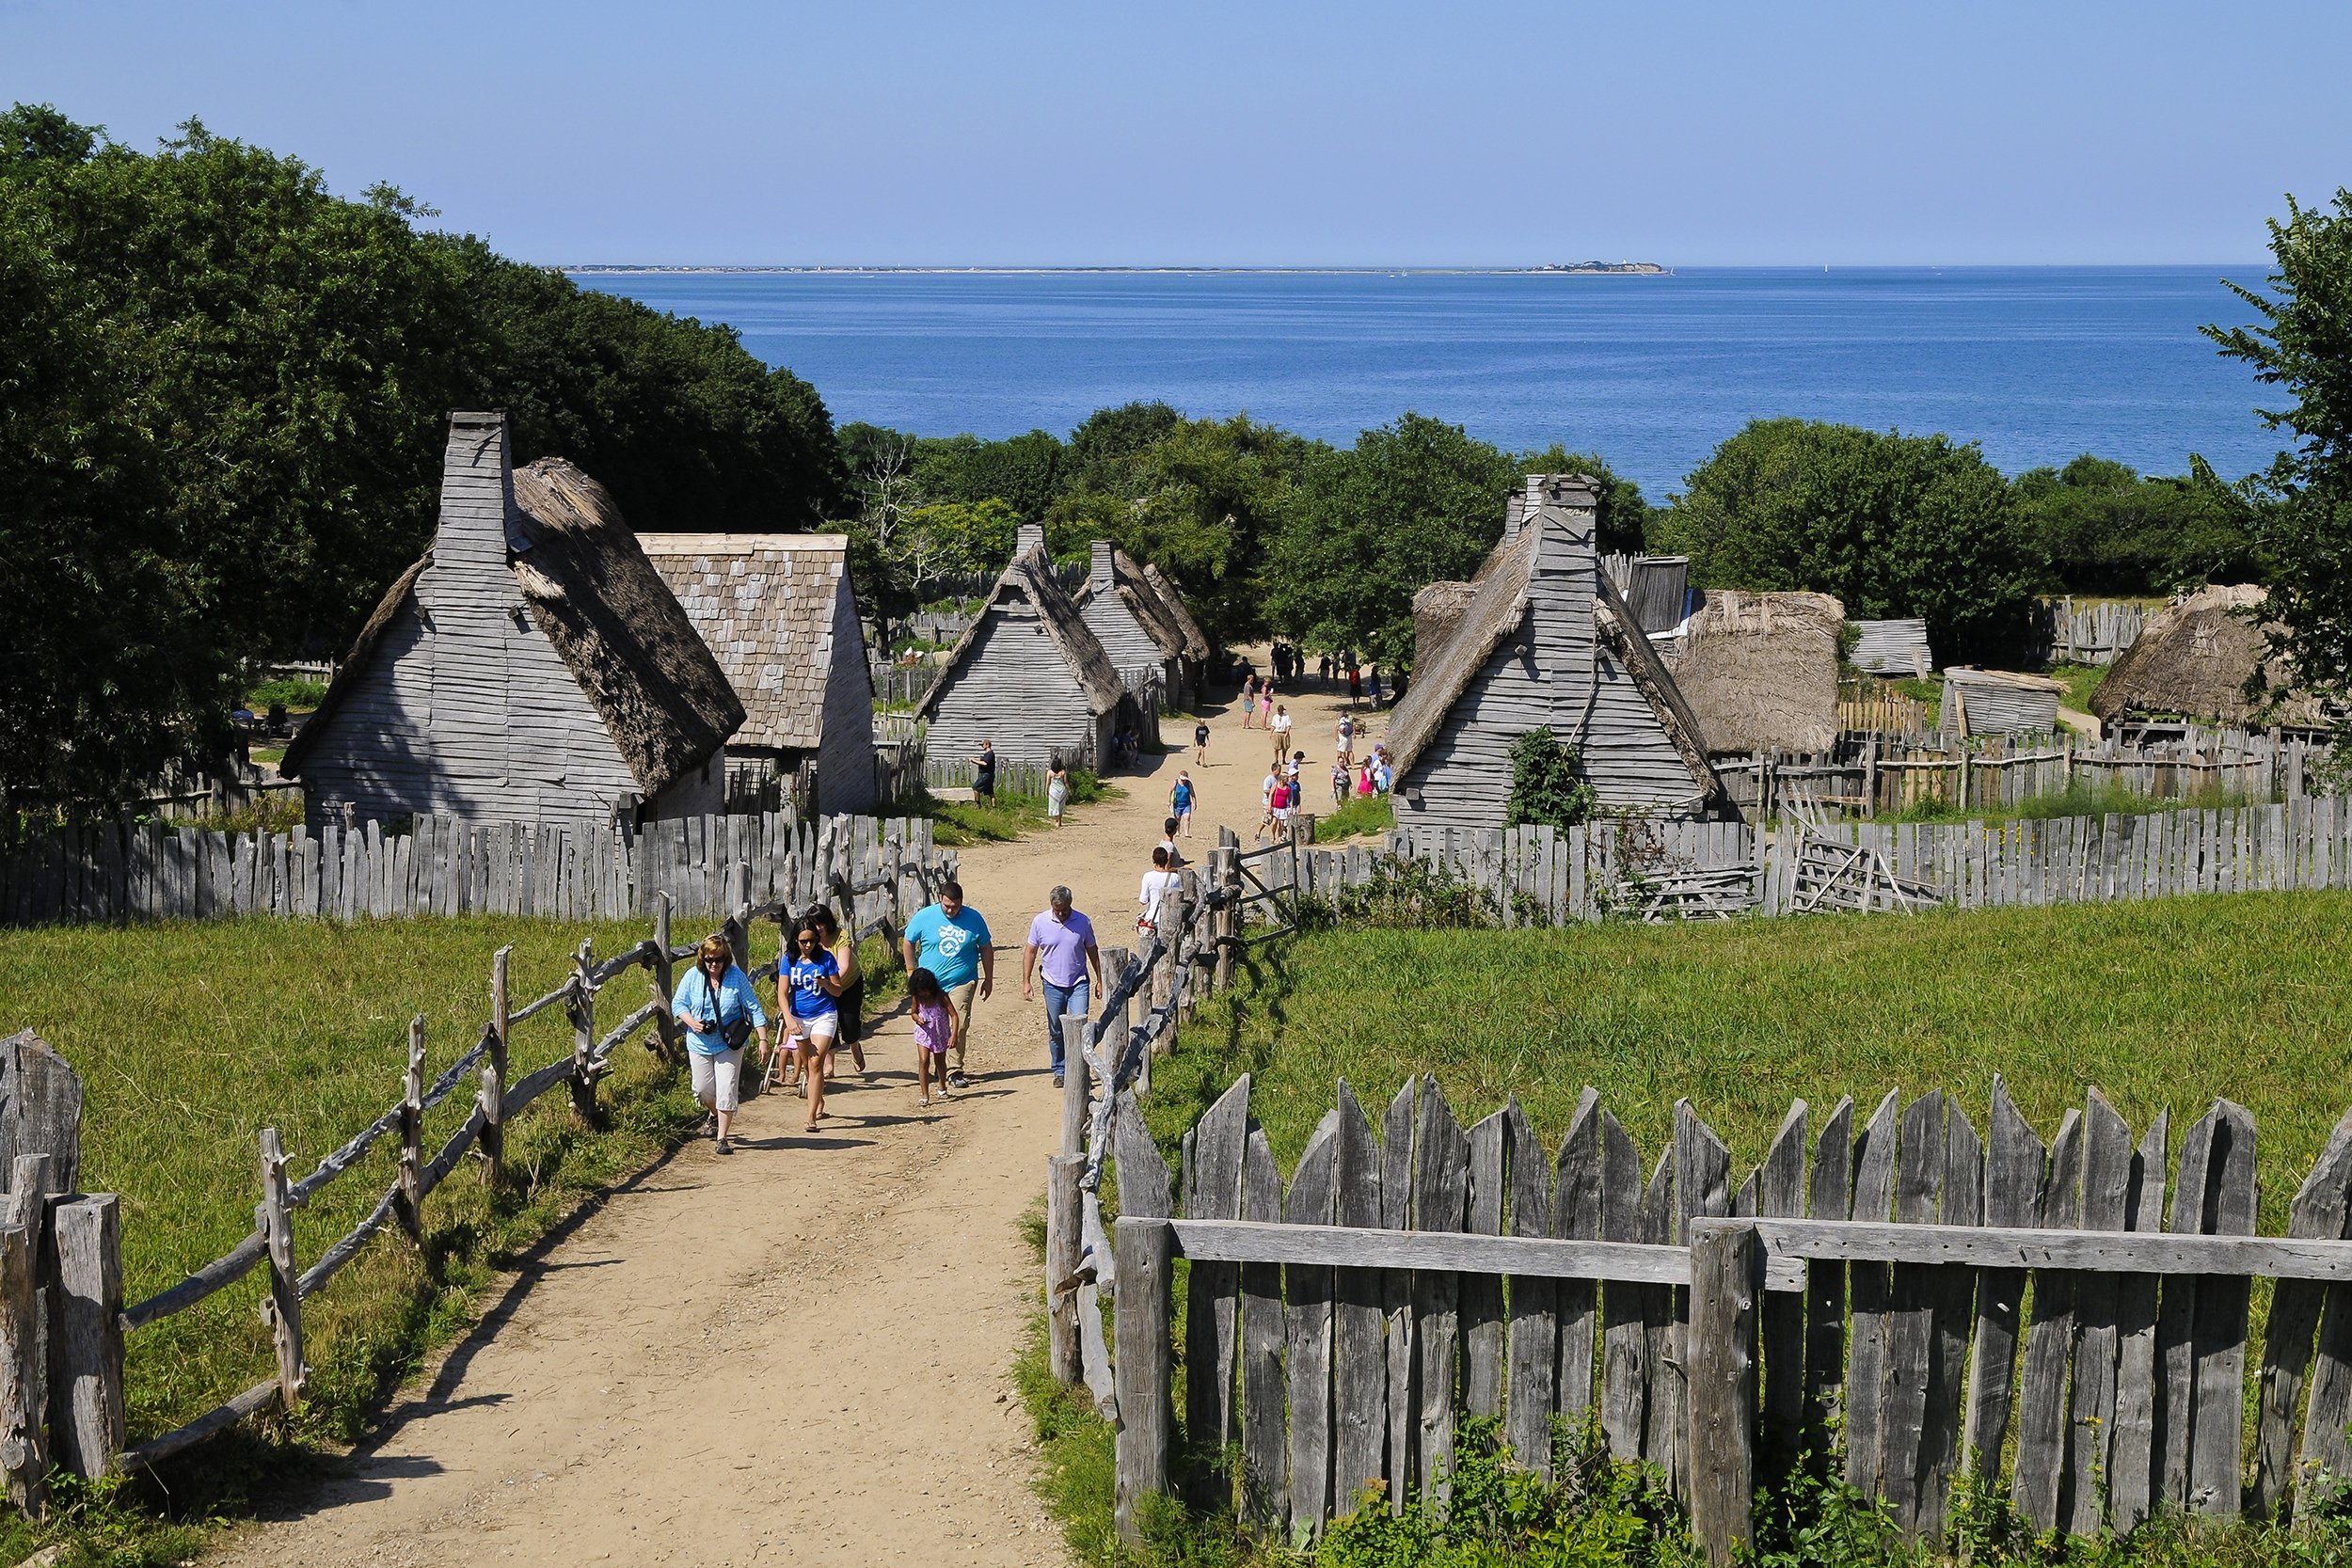 <p><strong>Location:</strong> Plymouth, Massachusetts <br><strong>Era:</strong> 1600s <br><strong>What to do:</strong> Stroll around Plymouth's re-created English village, engaging with costumed interpreters as they <a href="https://plimoth.org/plan-your-visit/explore-our-sites/17th-century-english-village">live and work as Pilgrims did</a> in the 17th century. More expensive tickets allow a visit to the Plimoth Grist Mill, constructed in 1636, for everything you could ever want to know about corn grinding. <br><strong>Cost:</strong> Starting at $32 for ages 13 and up; $29 for seniors 62 and up; $19 for ages 5 to 12</p>